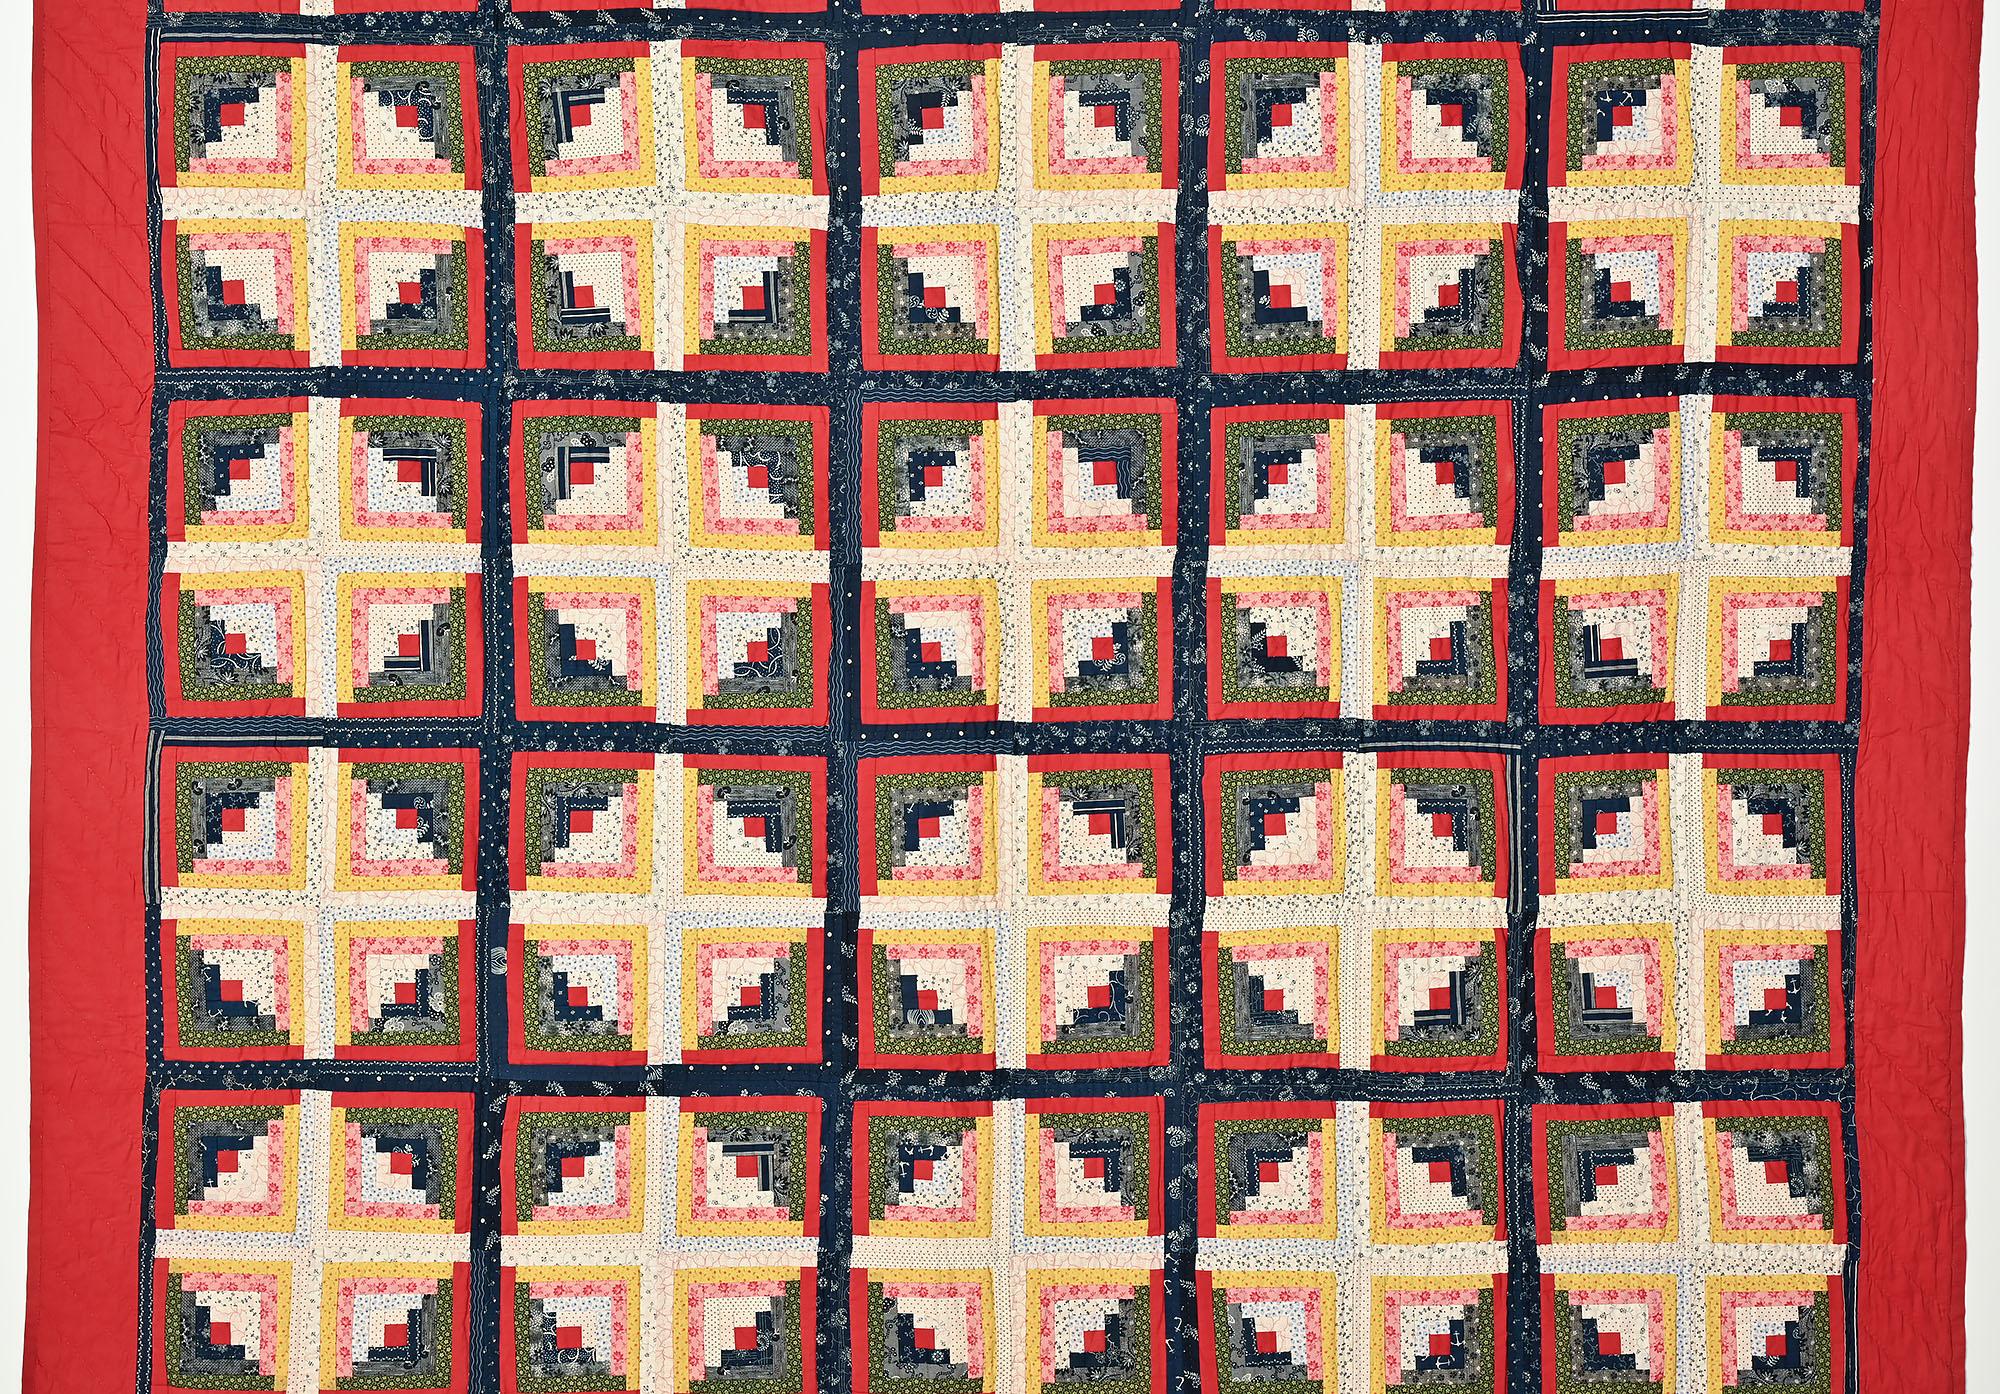 This Light and Dark Log Cabin quilt has more depth than the usual version of this pattern. The blocks are outlined with both red and indigo creating a frame around each of the diamond shape blocks. The placement of fabrics gives this quilt a nice